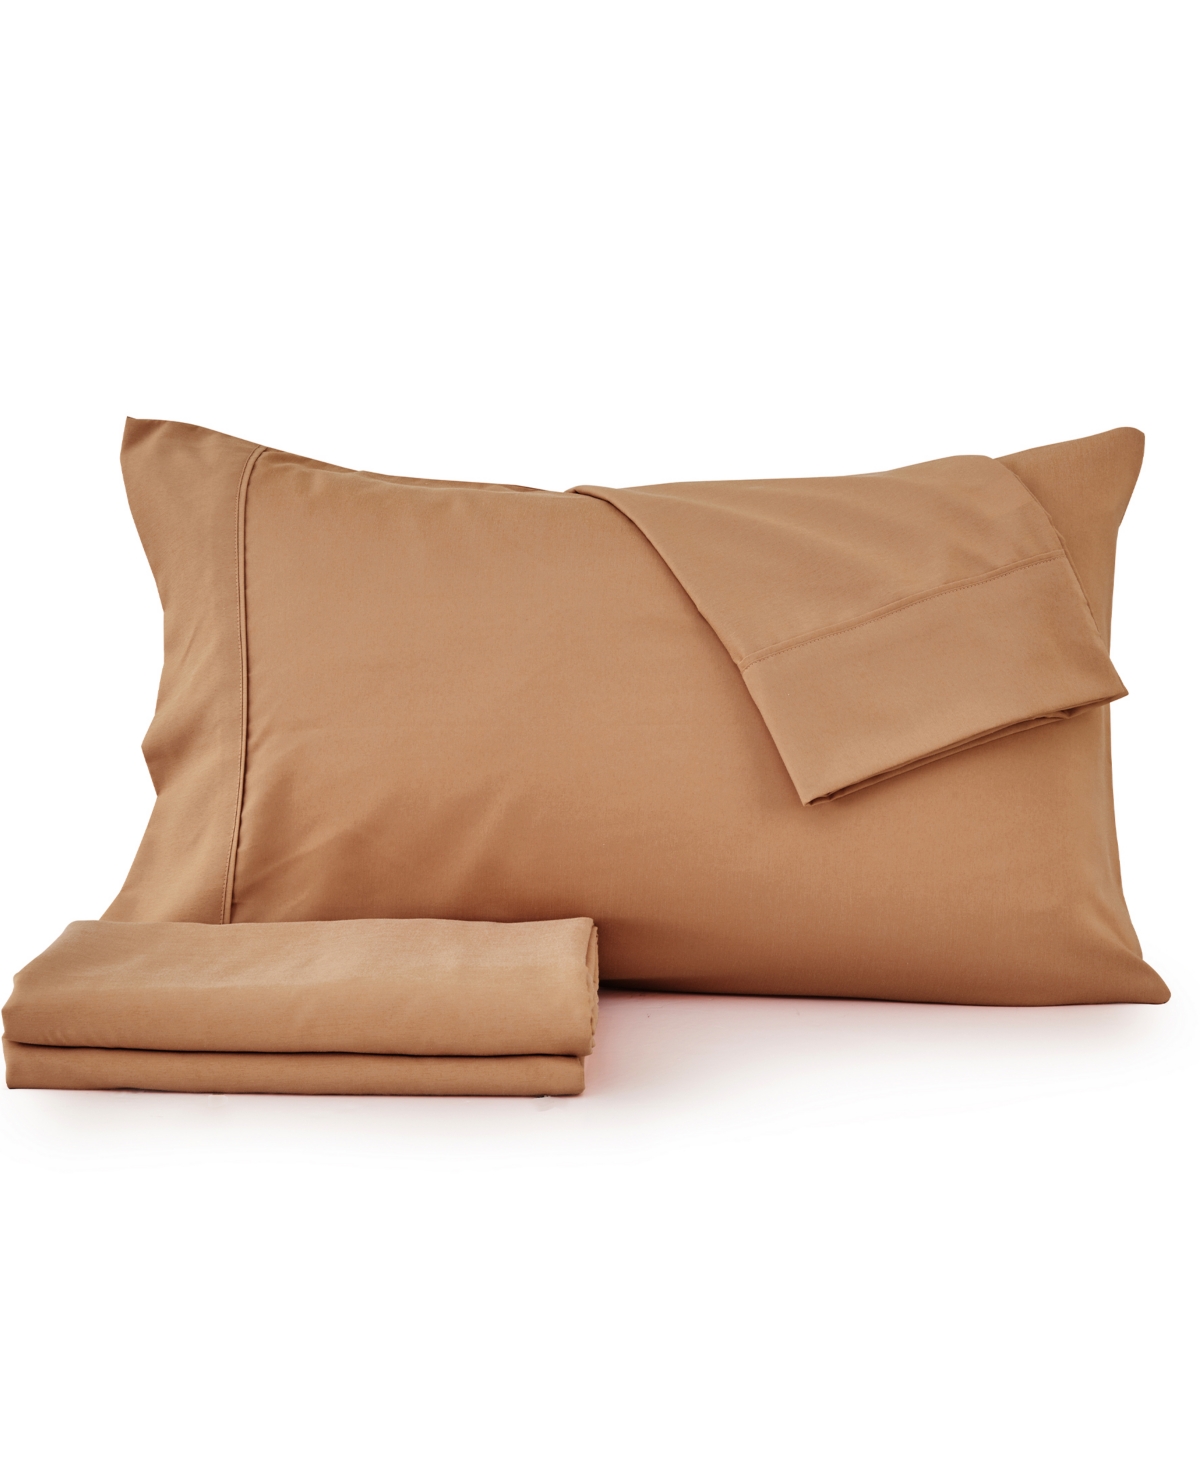 Premium Comforts Rayon From Bamboo Blend Crease-resistant 3 Piece Sheet Set, Twin In Almond